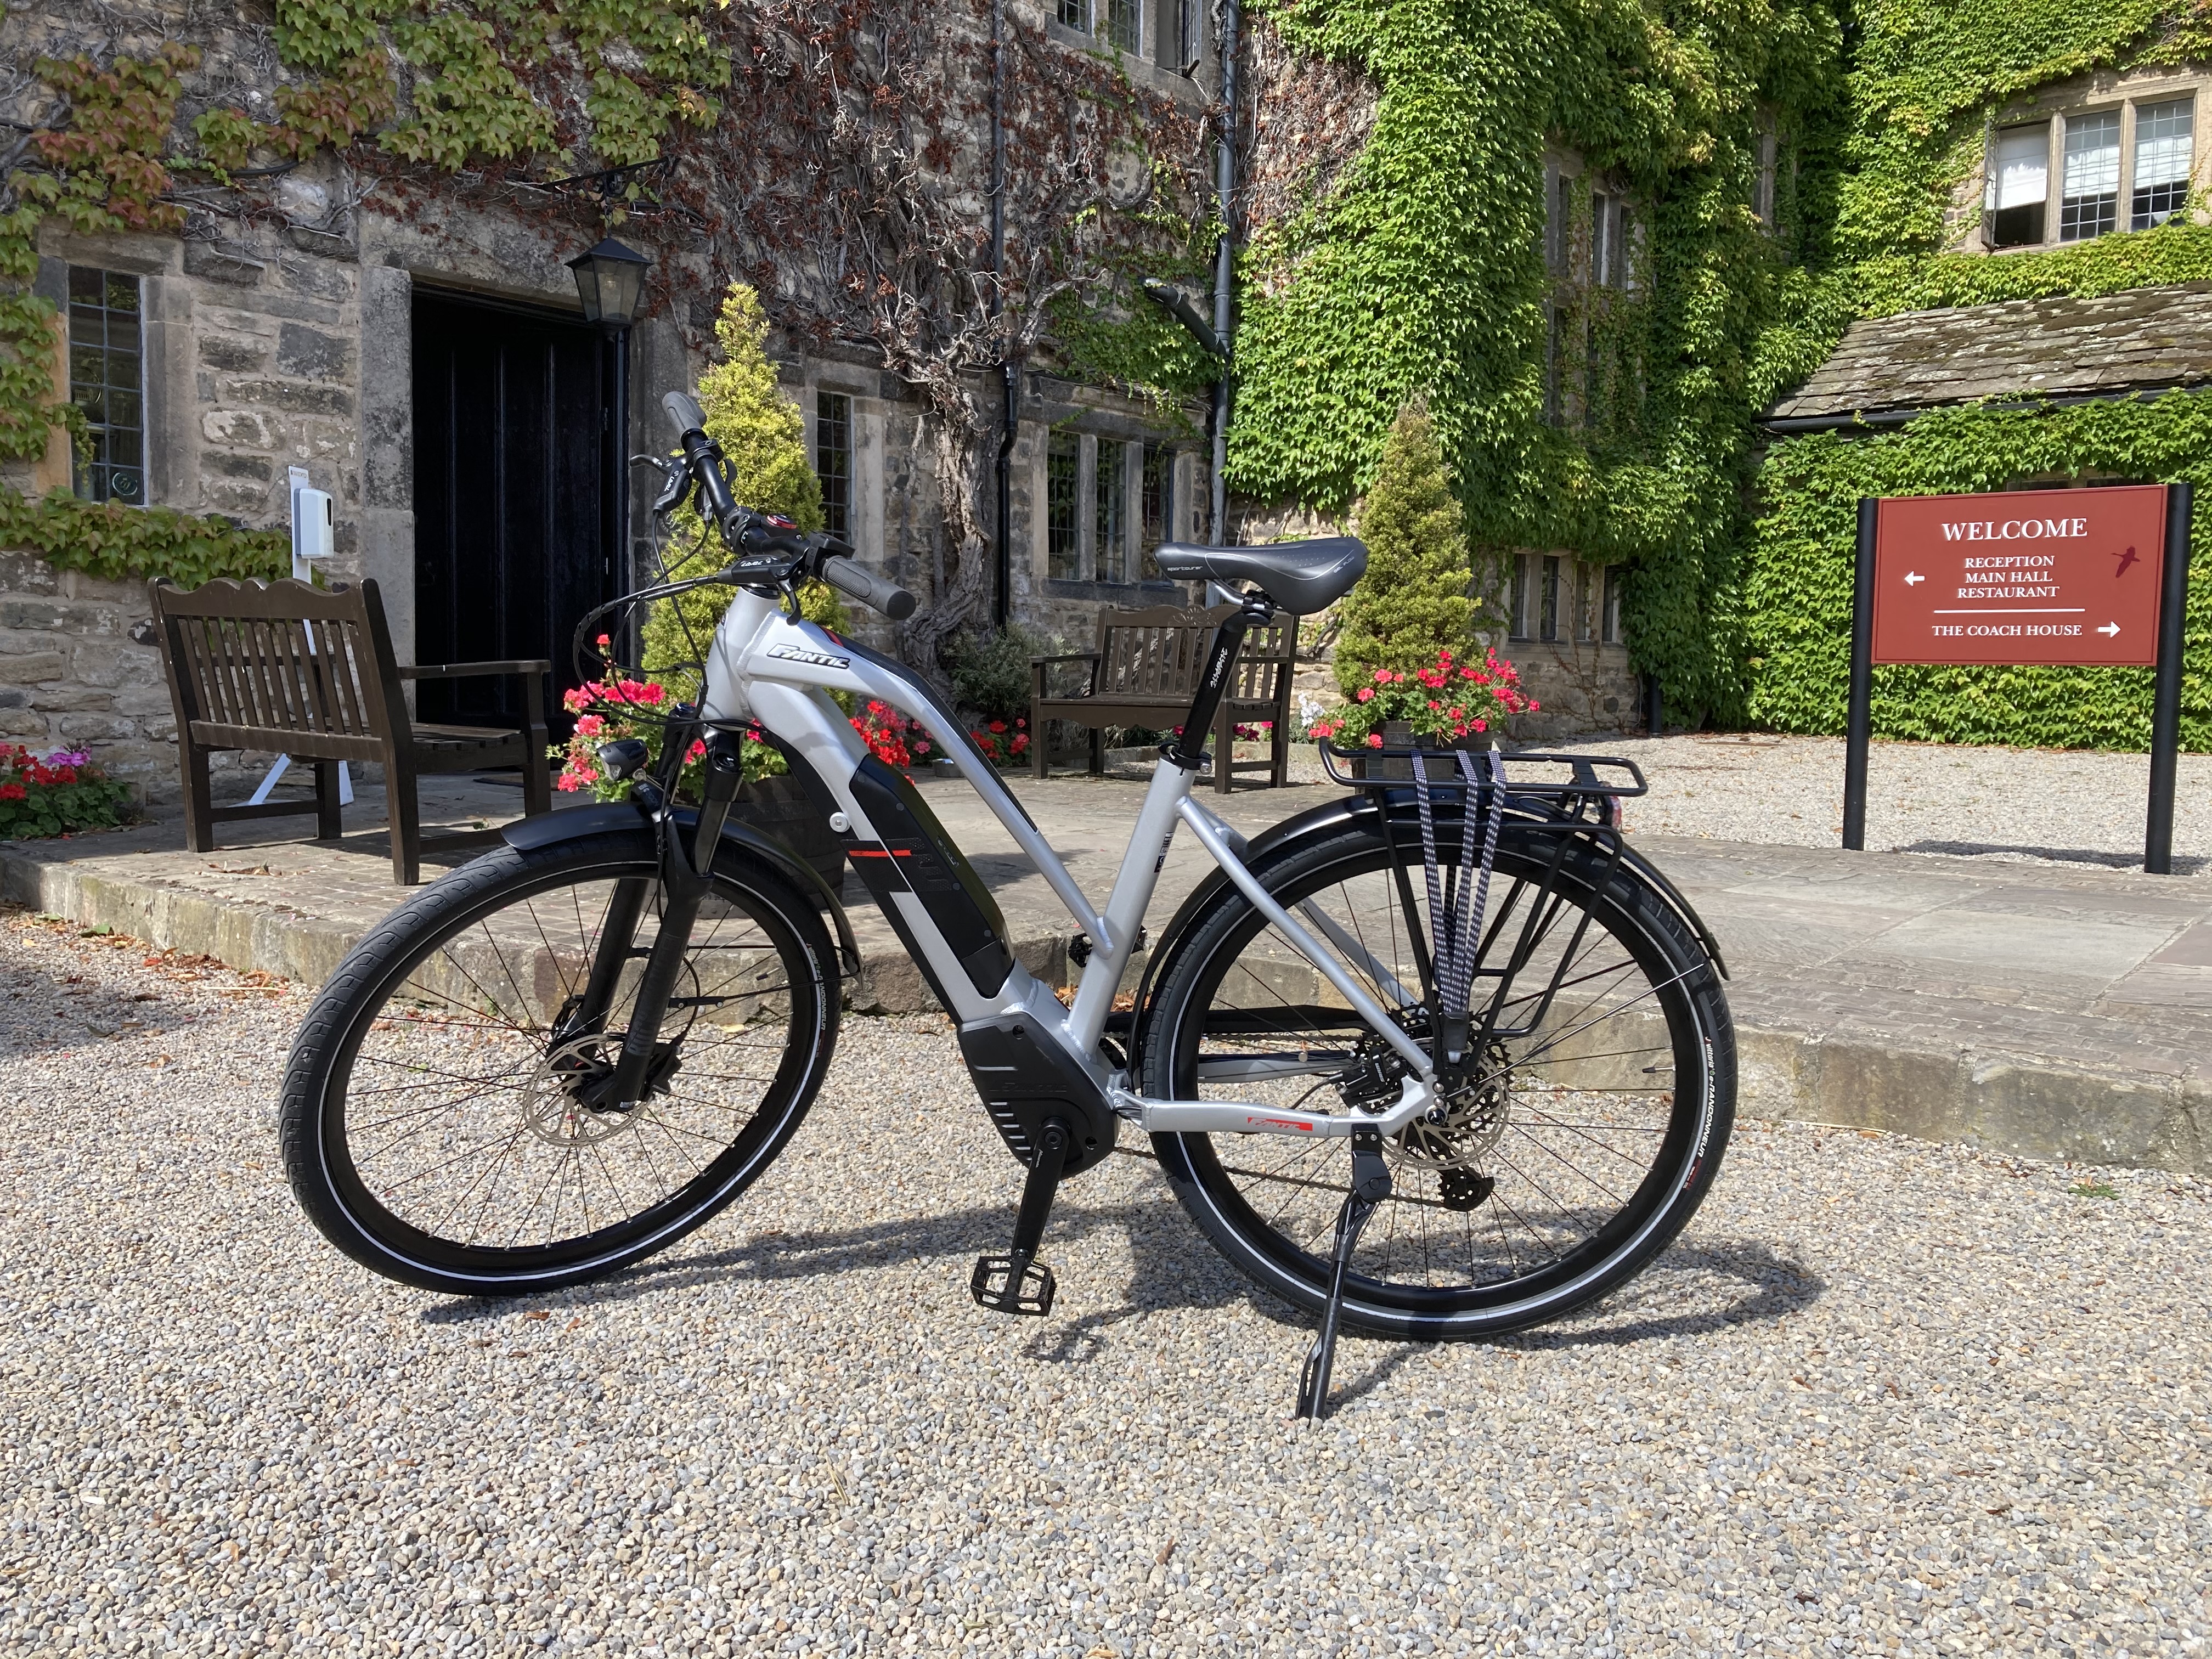 Electric bike hire to explore the area